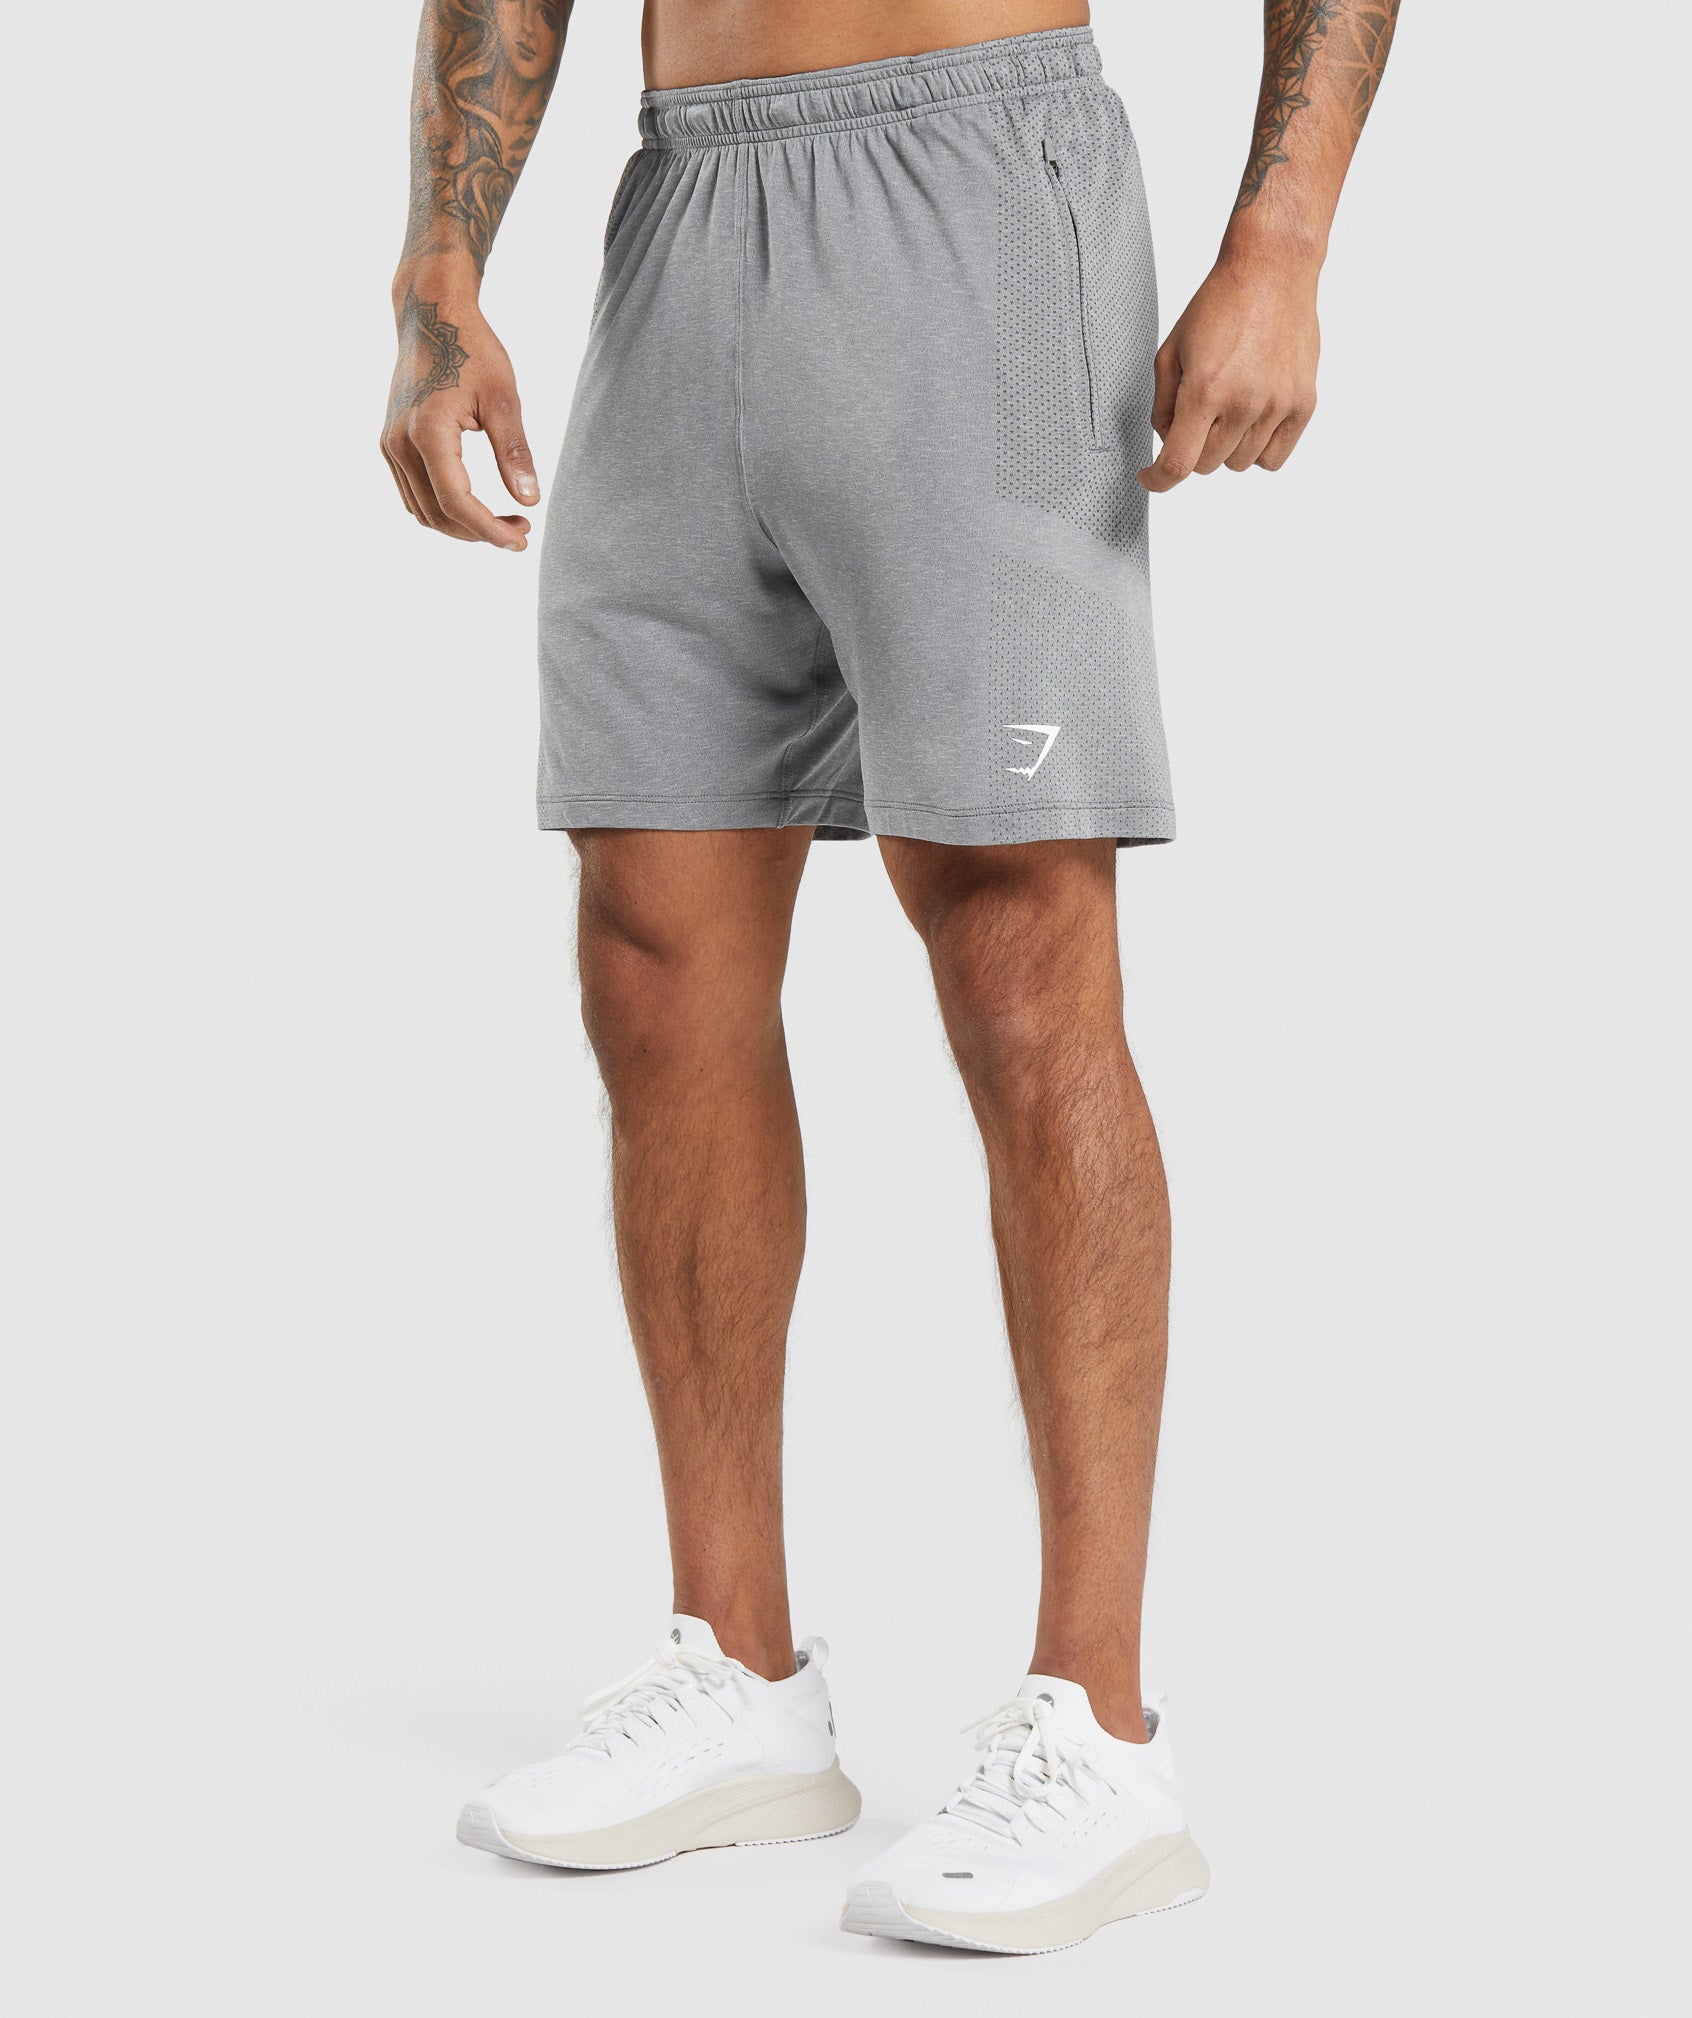 Vital Light Shorts in Charcoal Grey Marl - view 1